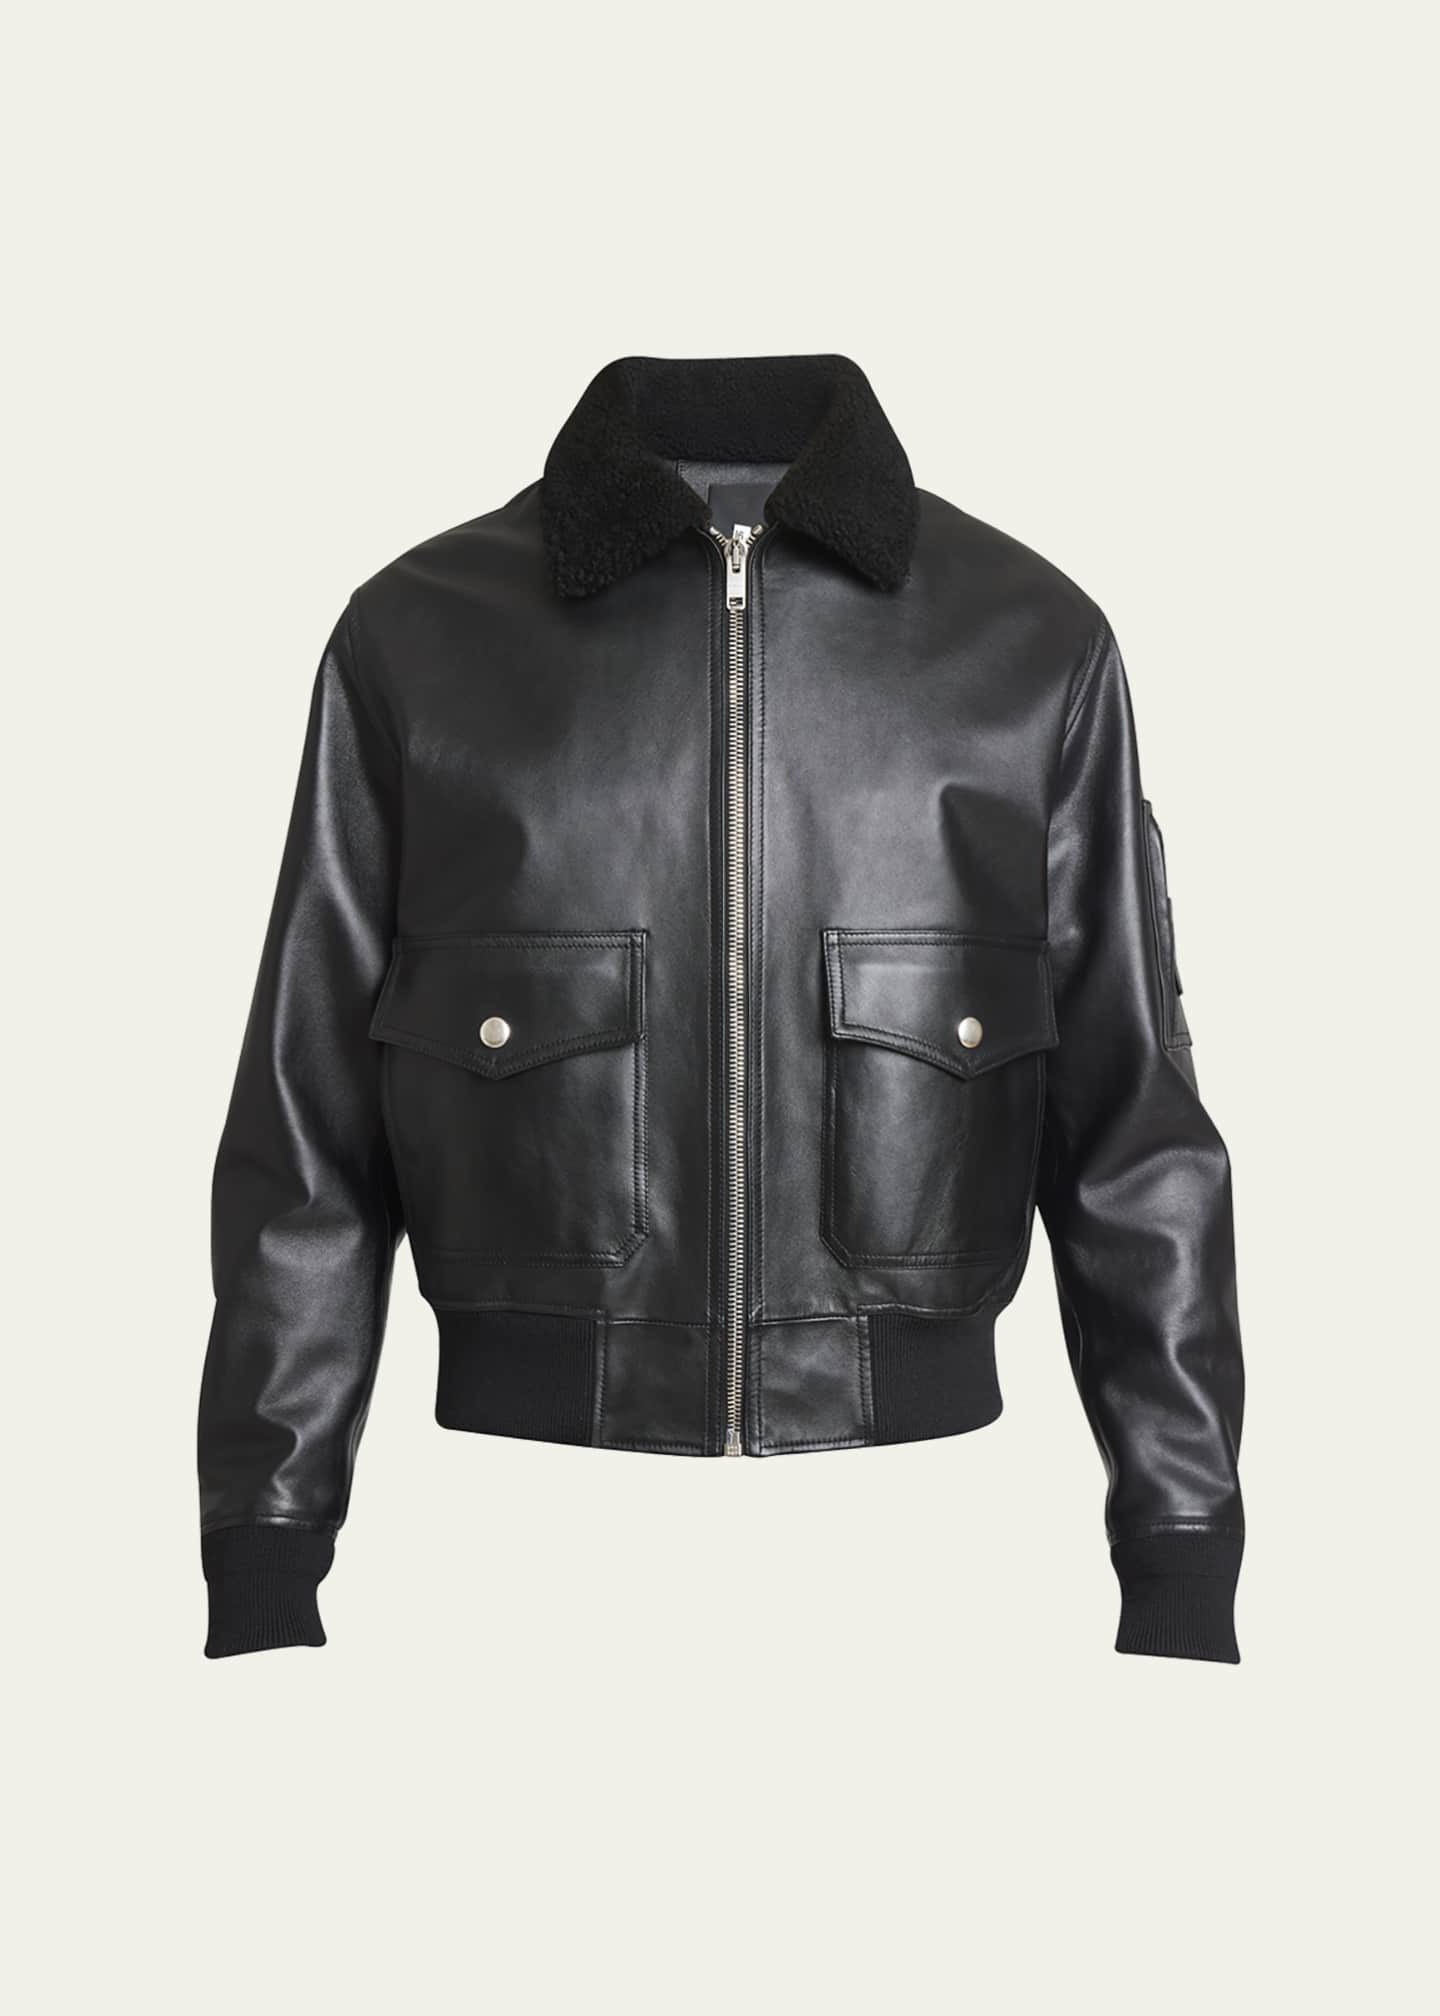 Givenchy Men's Leather Aviator Jacket with Shearling Collar - Bergdorf ...